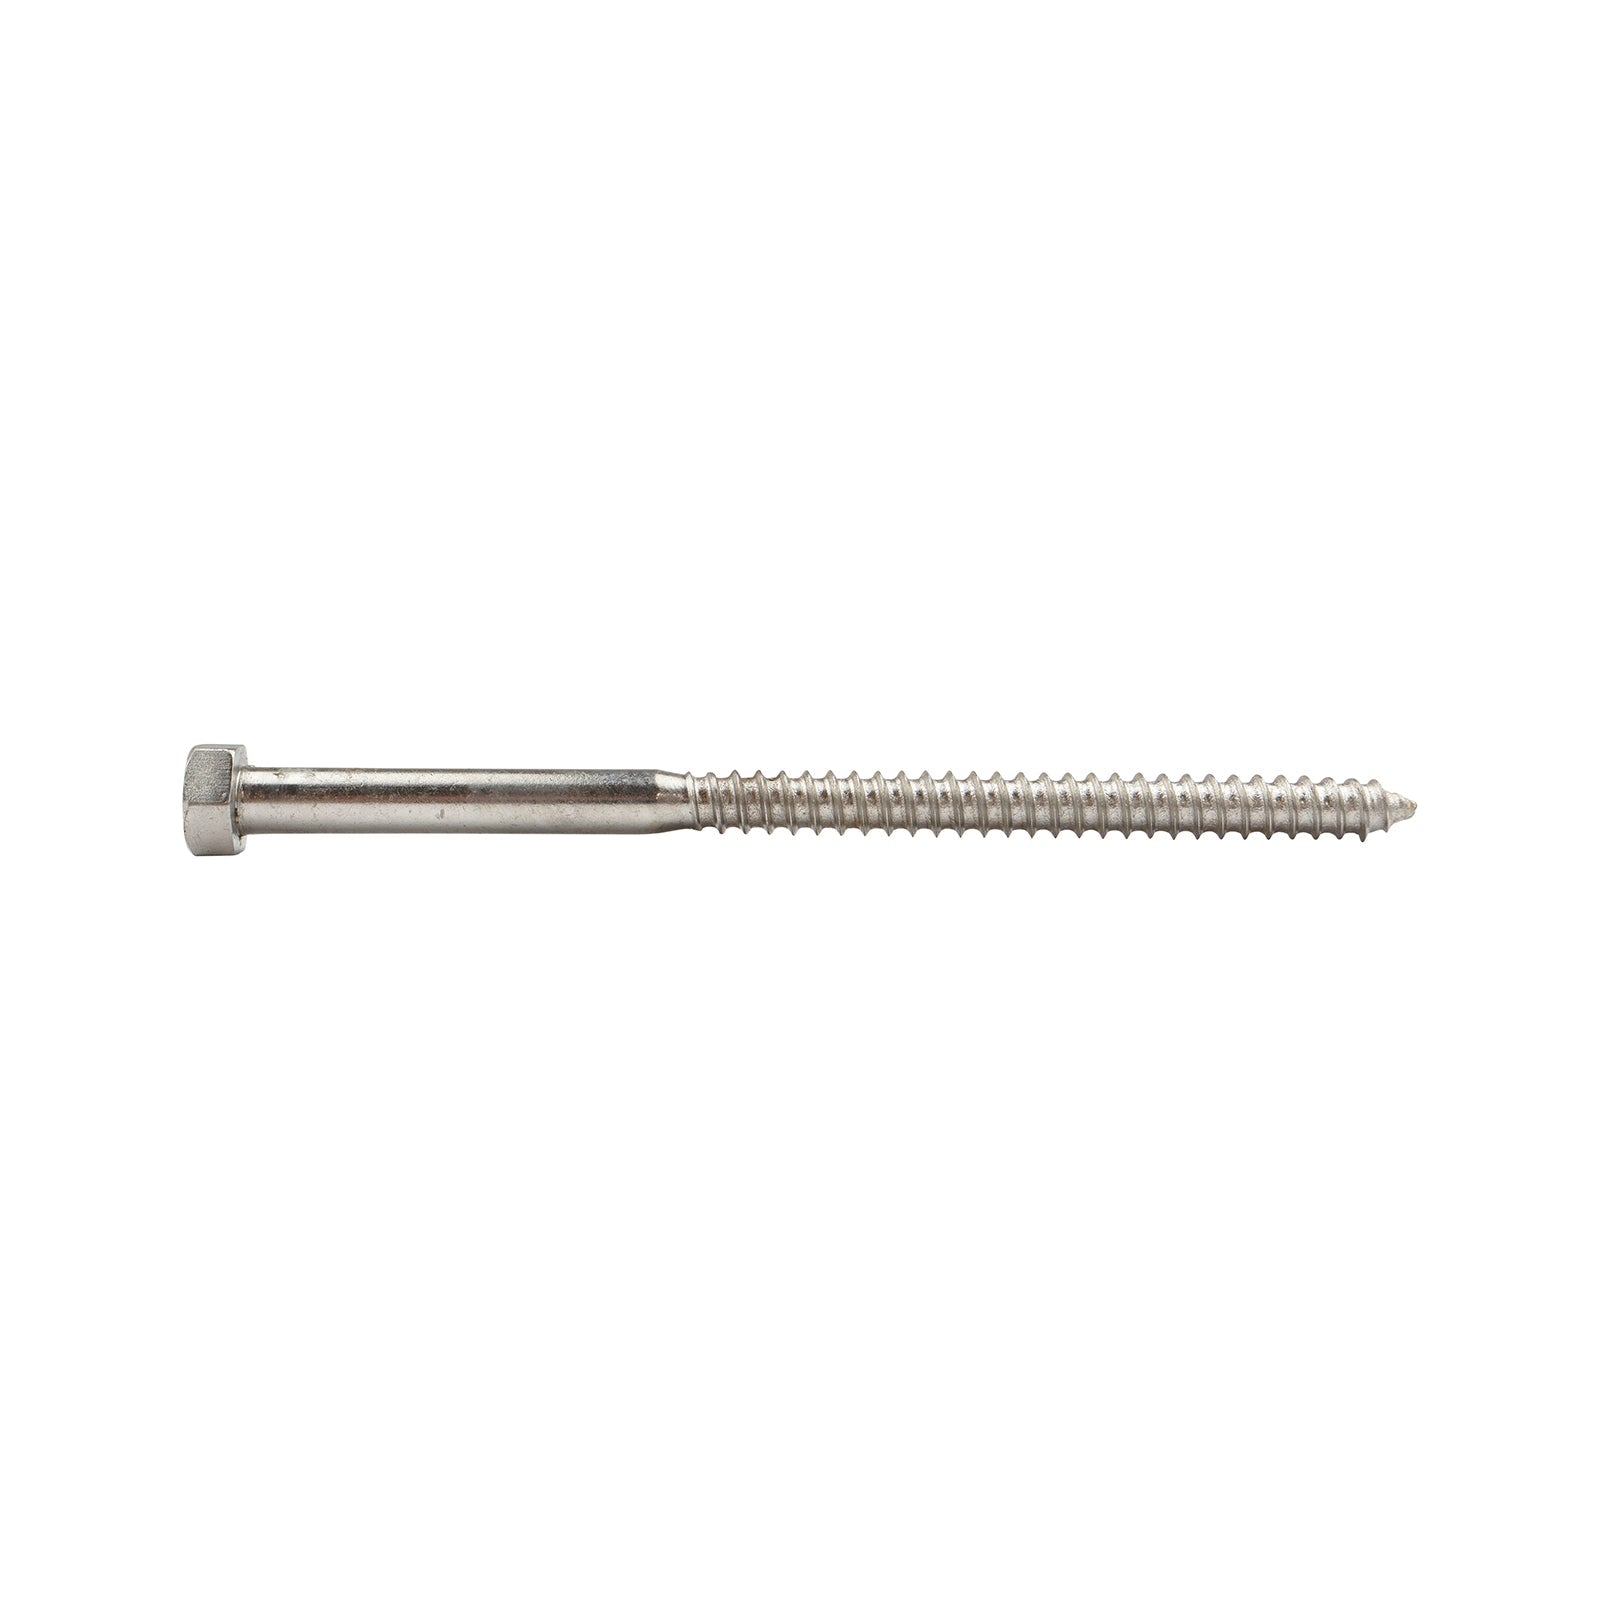 5/16-9 x 5-1/2 Conquest Hex Head Lag Bolt for Wood - 316 Stainless Steel  – Fasteners Plus